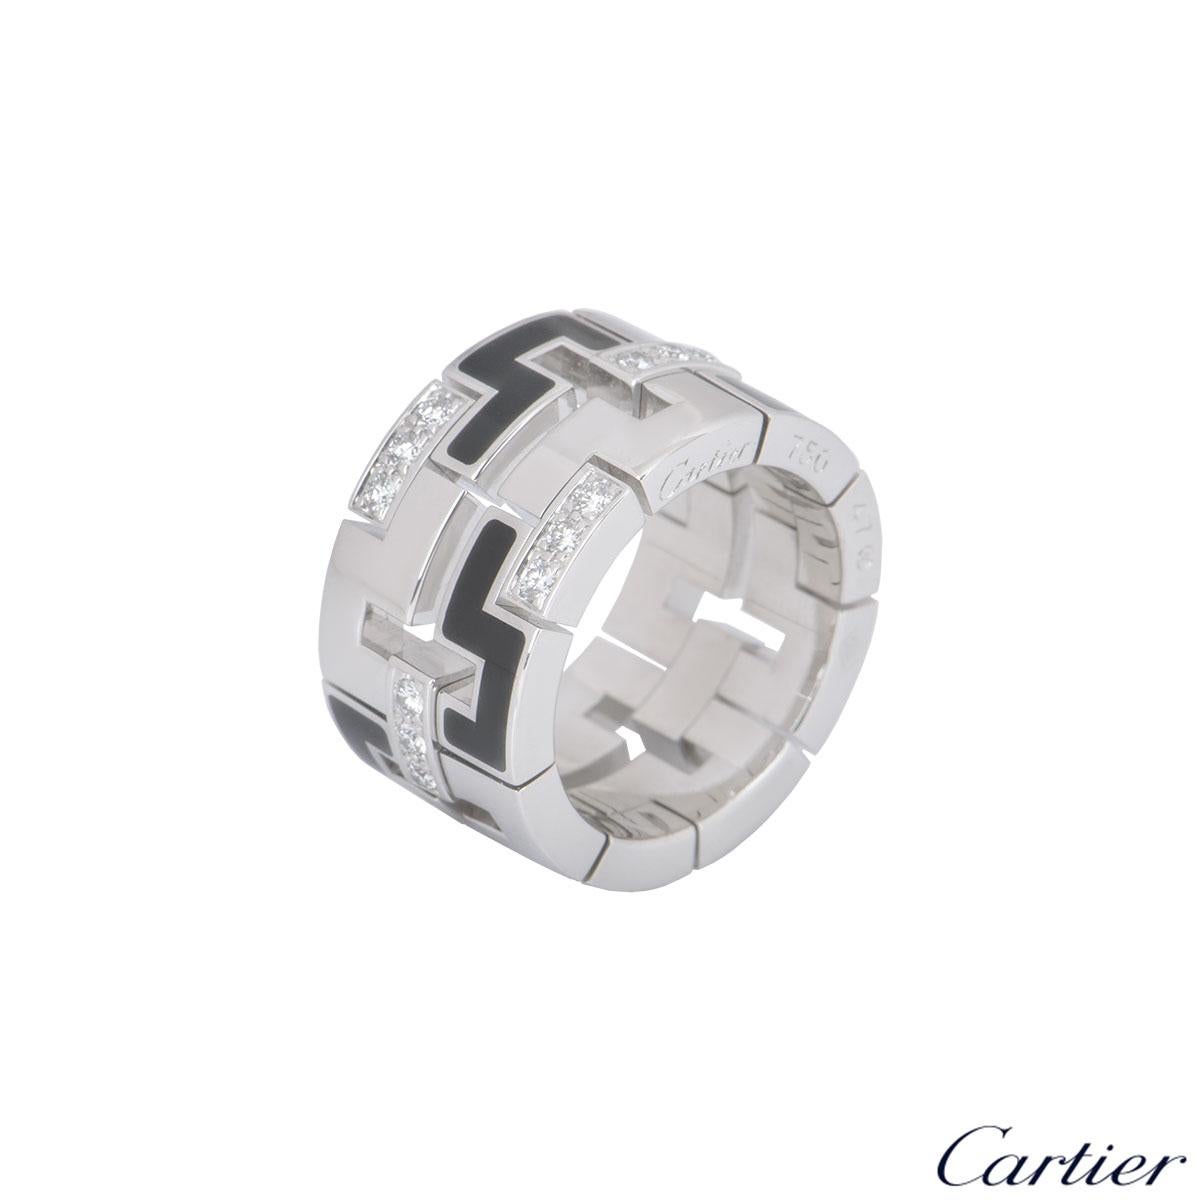 An 18k white gold diamond and enamel ring by Cartier from the Le Baiser Du Dragon collection. The square abstract design alternates with polished, black enamel and round brilliant cut diamond set links. There are 27 round brilliant cut diamonds with